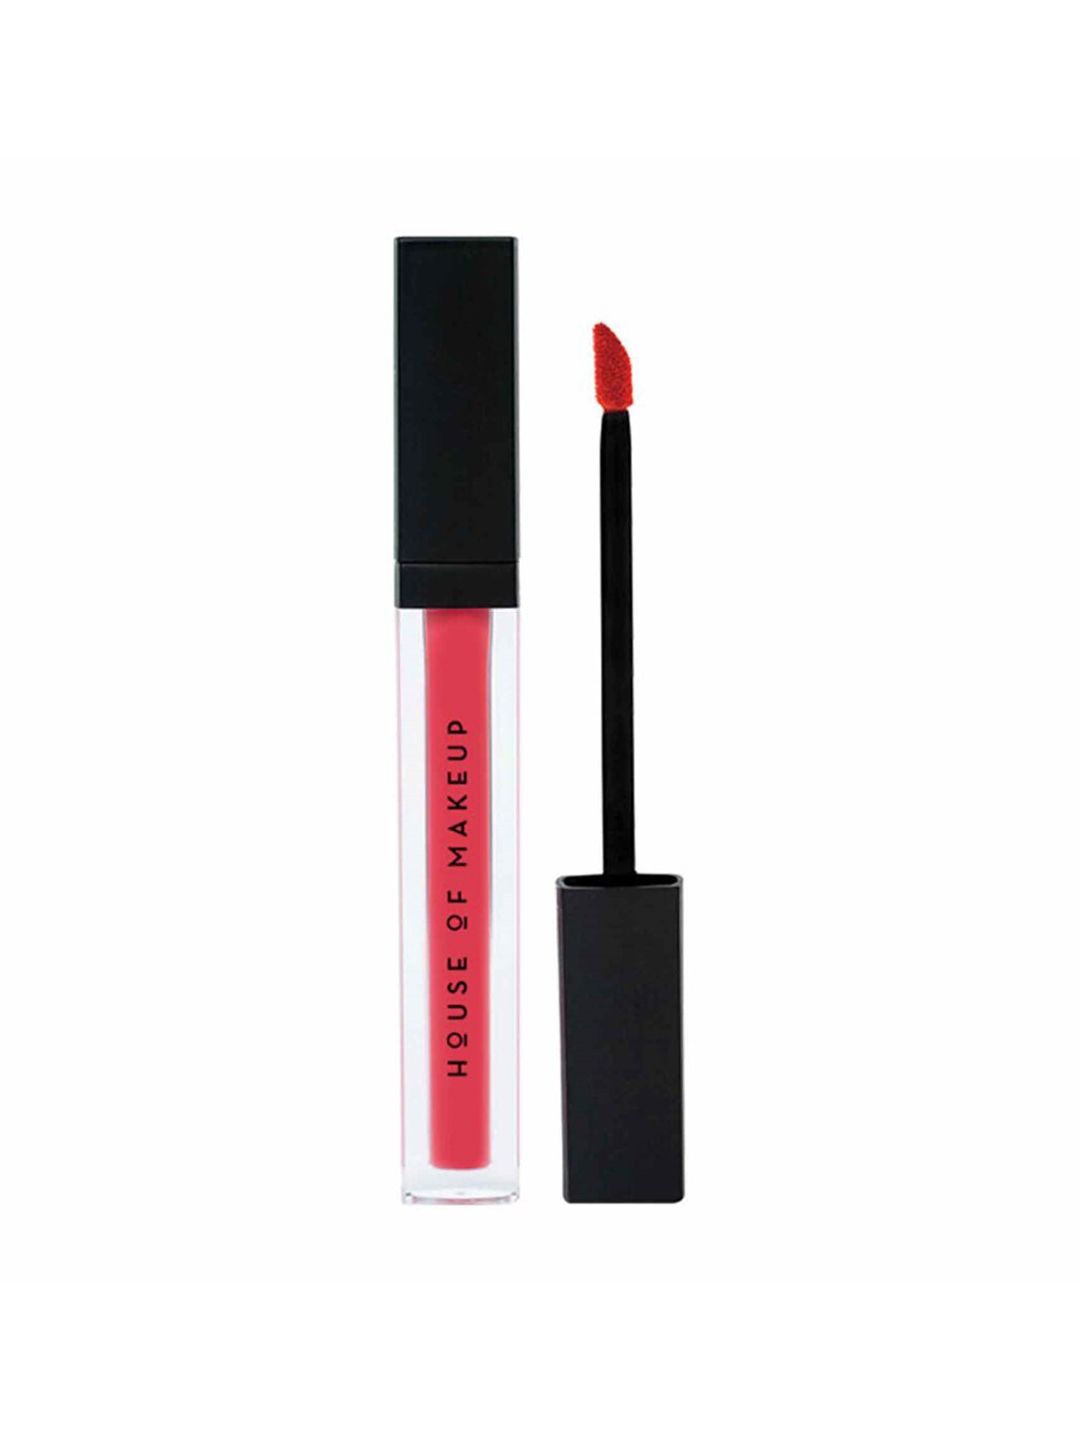 HOUSE OF MAKEUP Pout Potion Liquid Matte Lipstick - Keeper Price in India